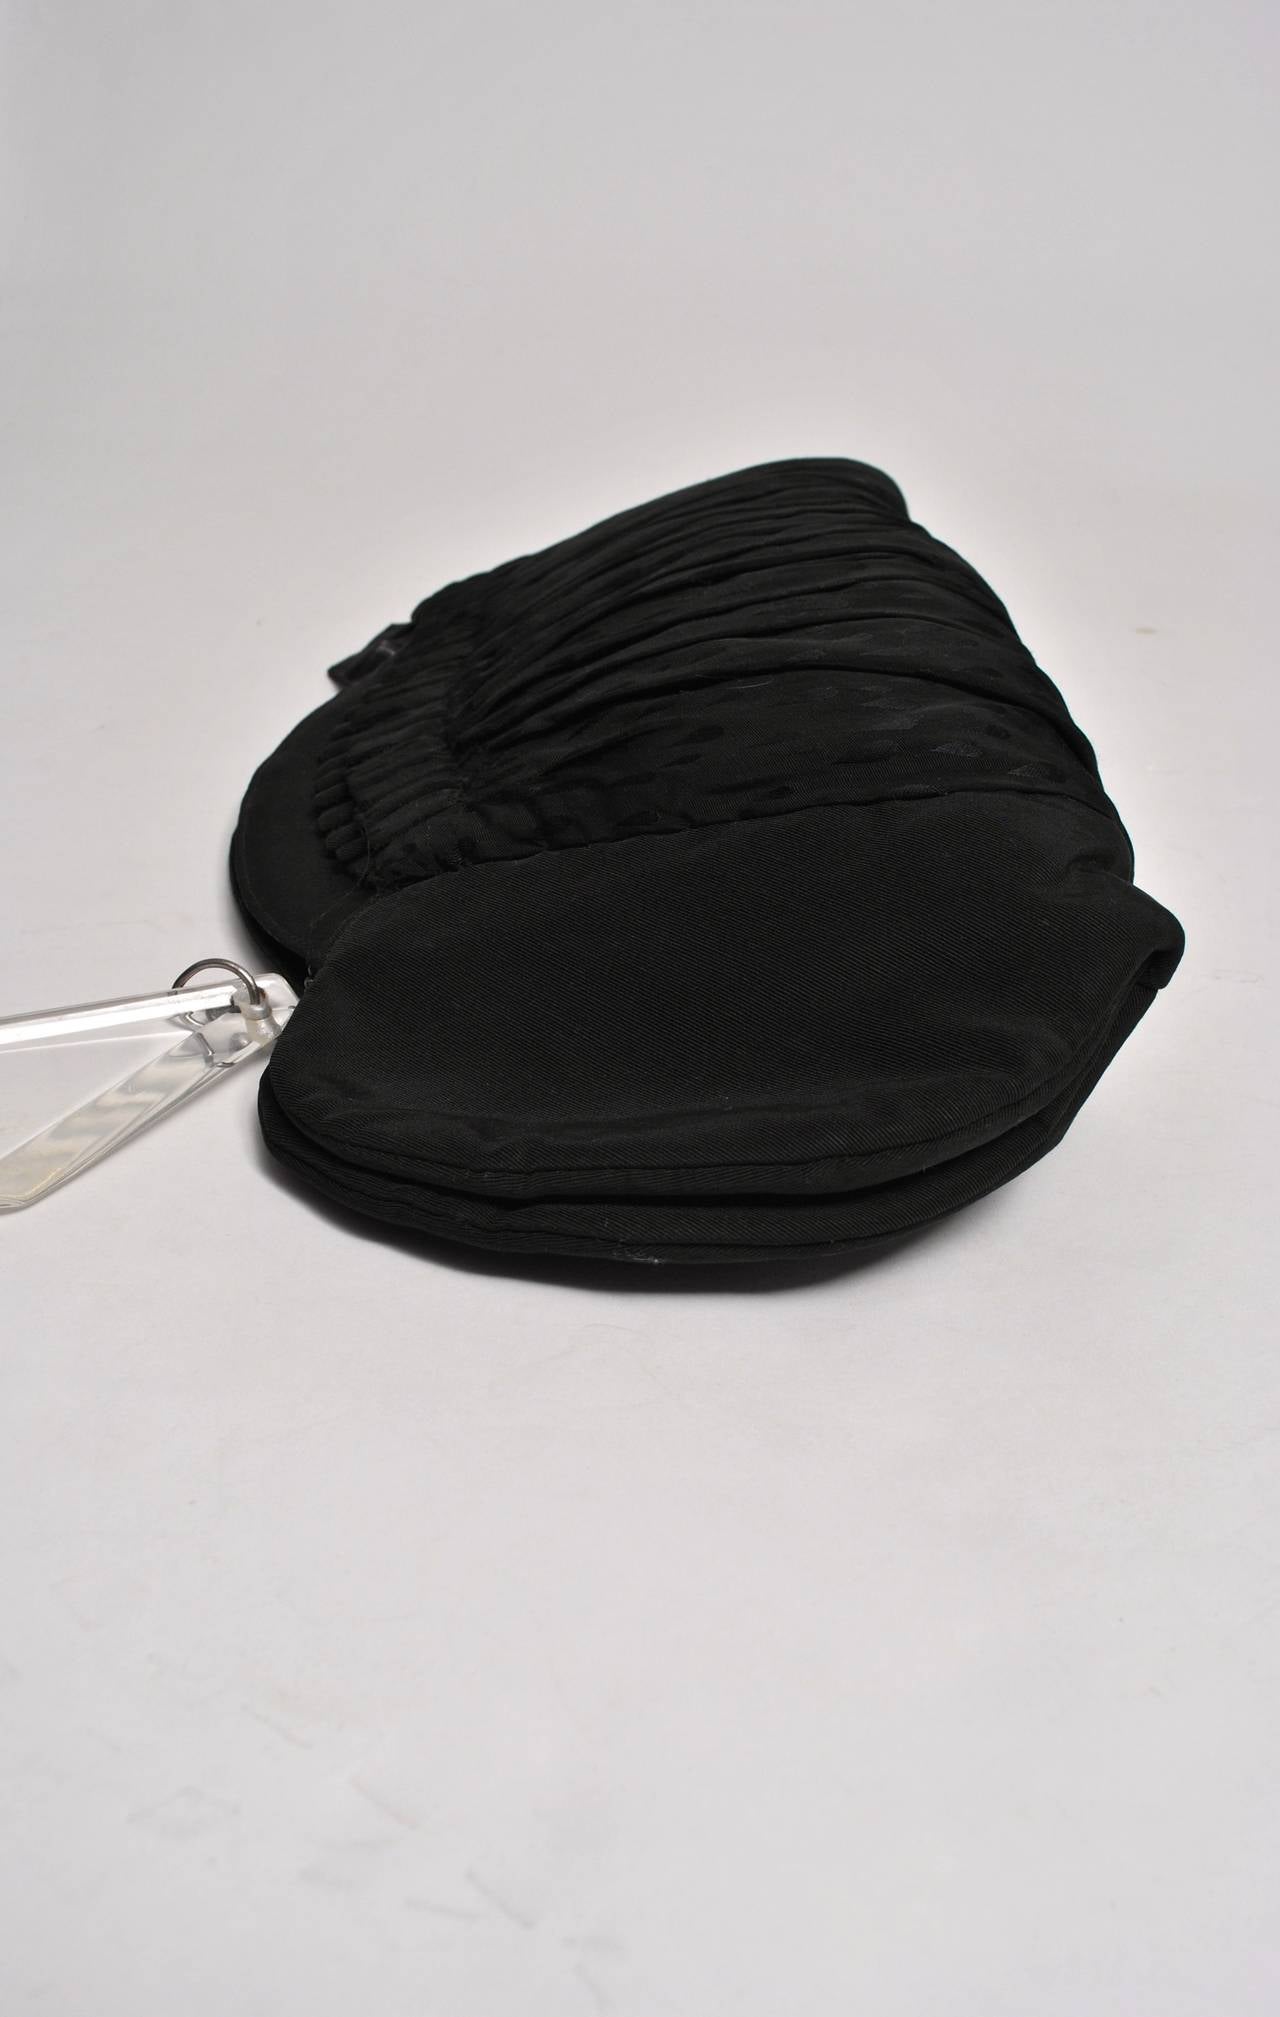 A unique design from the 1940s, this oversized clutch in black faille features a curved top and sides as well as central section of black-on-black design fabric that matches the trim on the gloves. Most likely a custom design, the clutch also boasts